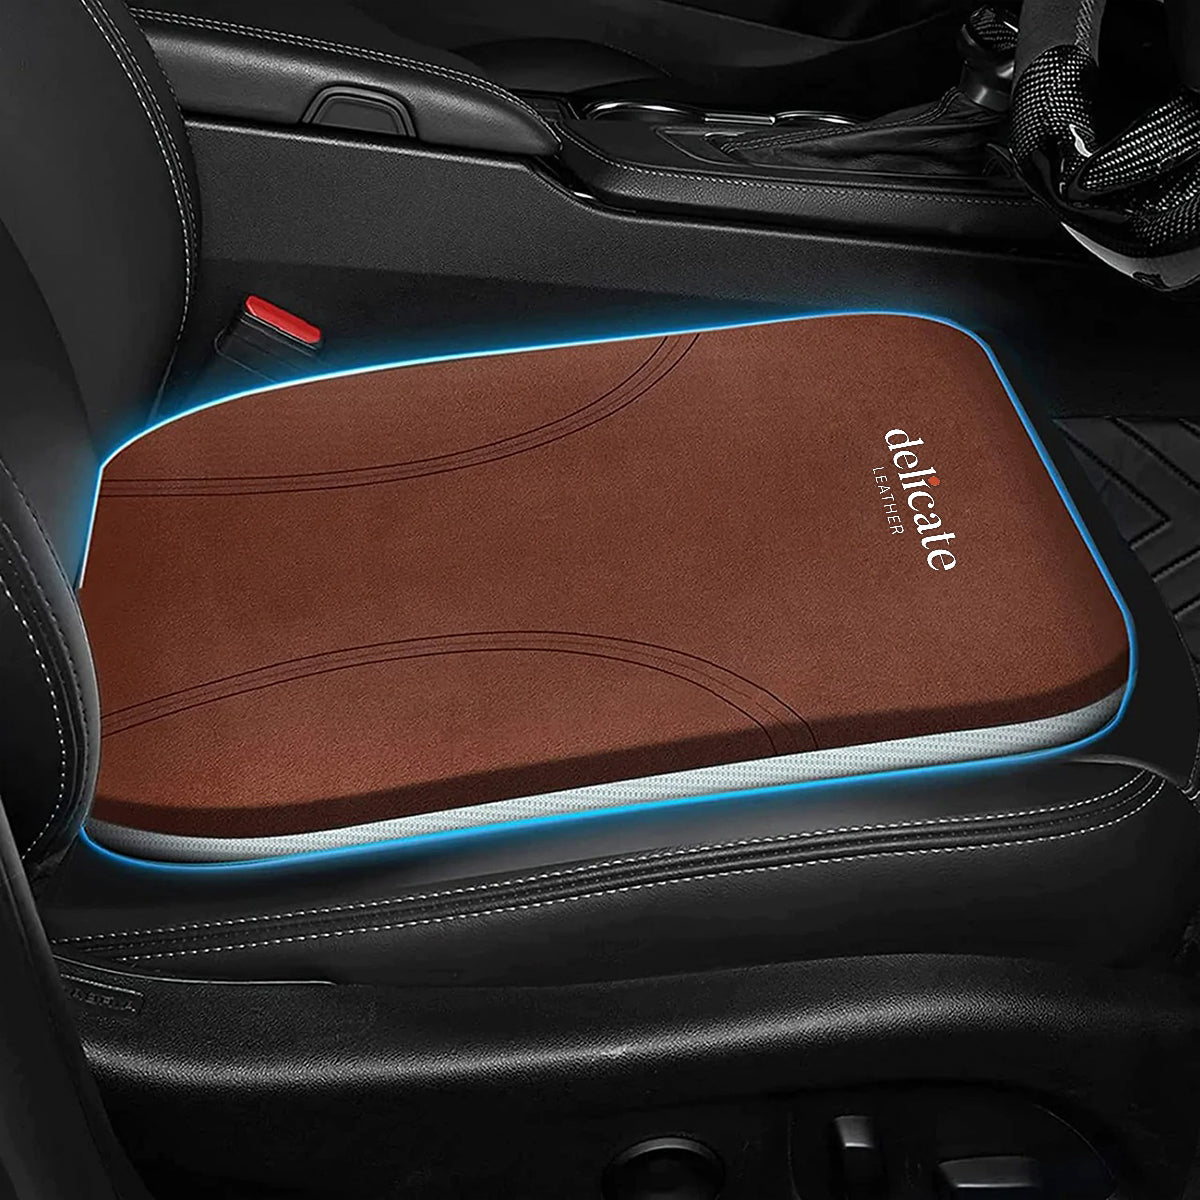 Land Rover Car Seat Cushion: Enhance Comfort and Support for Your Drive